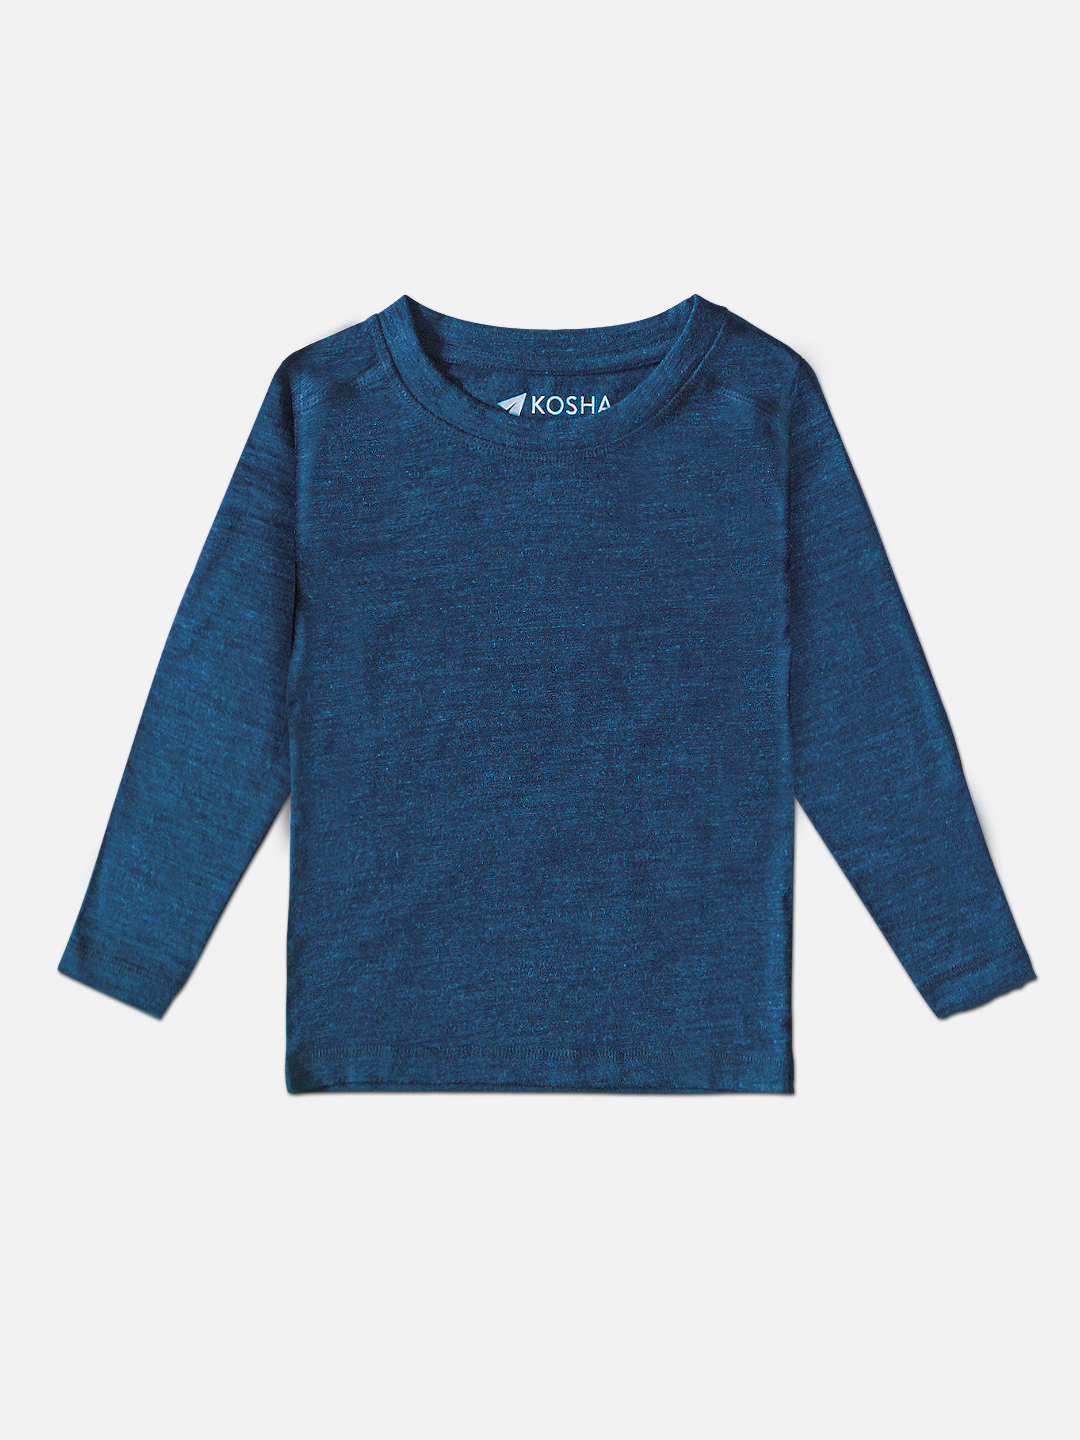  Blue Merino Wool and Bamboo Full Sleeves Thermal Top | Unisex 